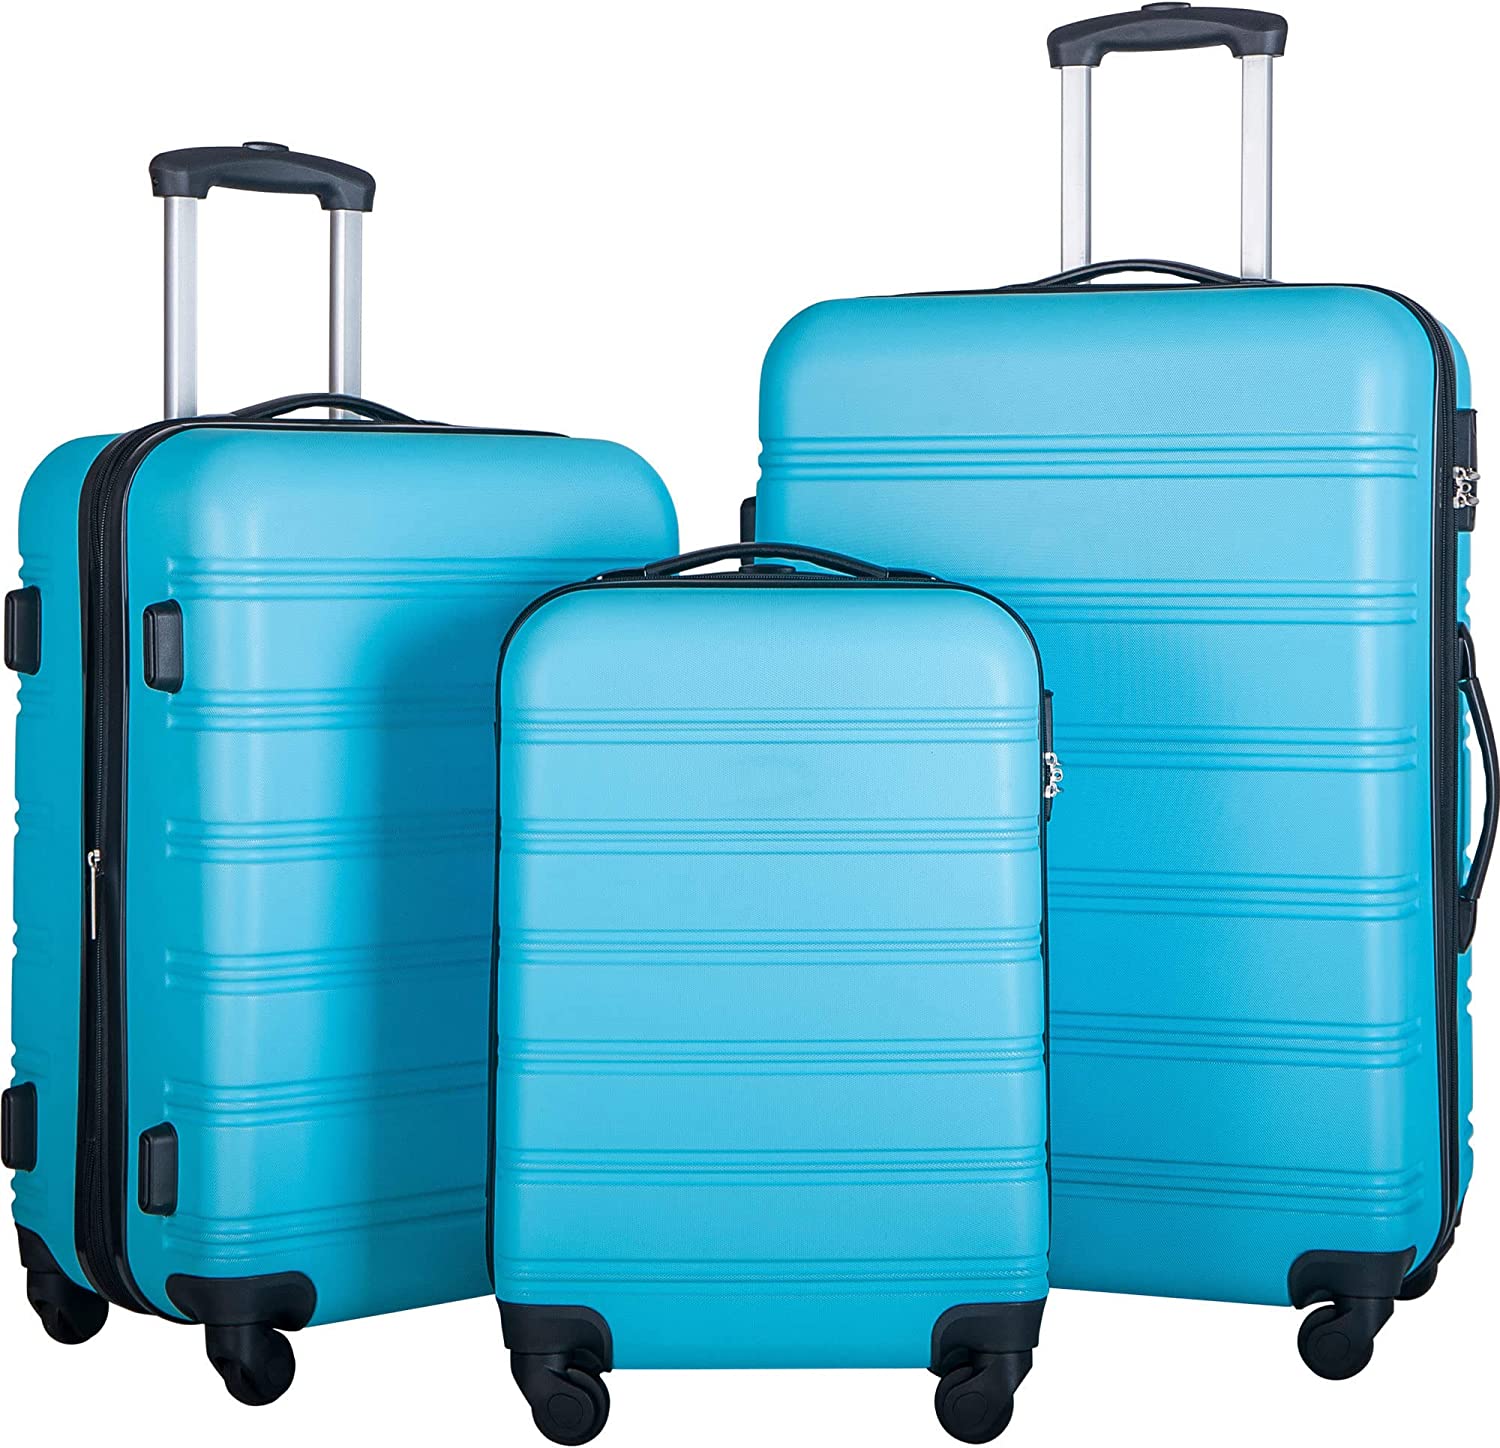 Merax Lightweight Spinner Affordable Luggage Set, 3-Piece